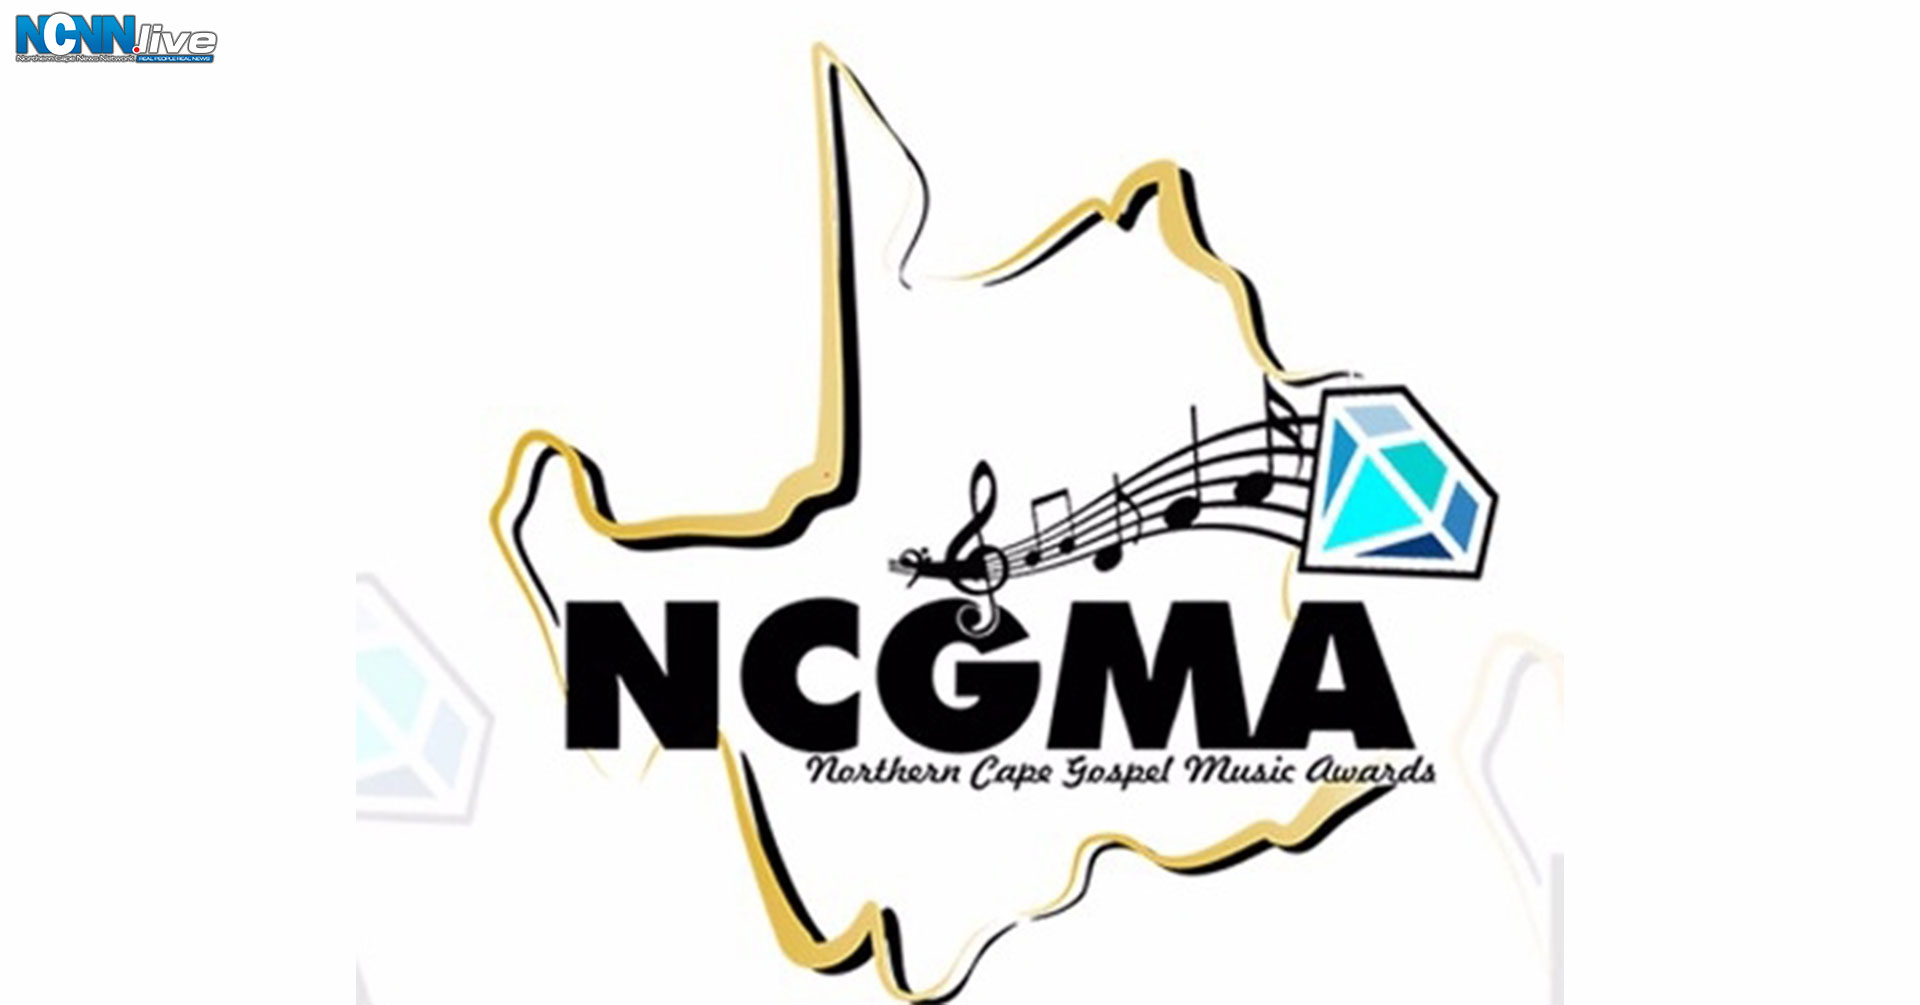 NORTHERN_CAPE_GOSPEL_MUSIC_AWARDS_TO_SET_STAGE_FOR_ARTISTS_GROWTH-FI